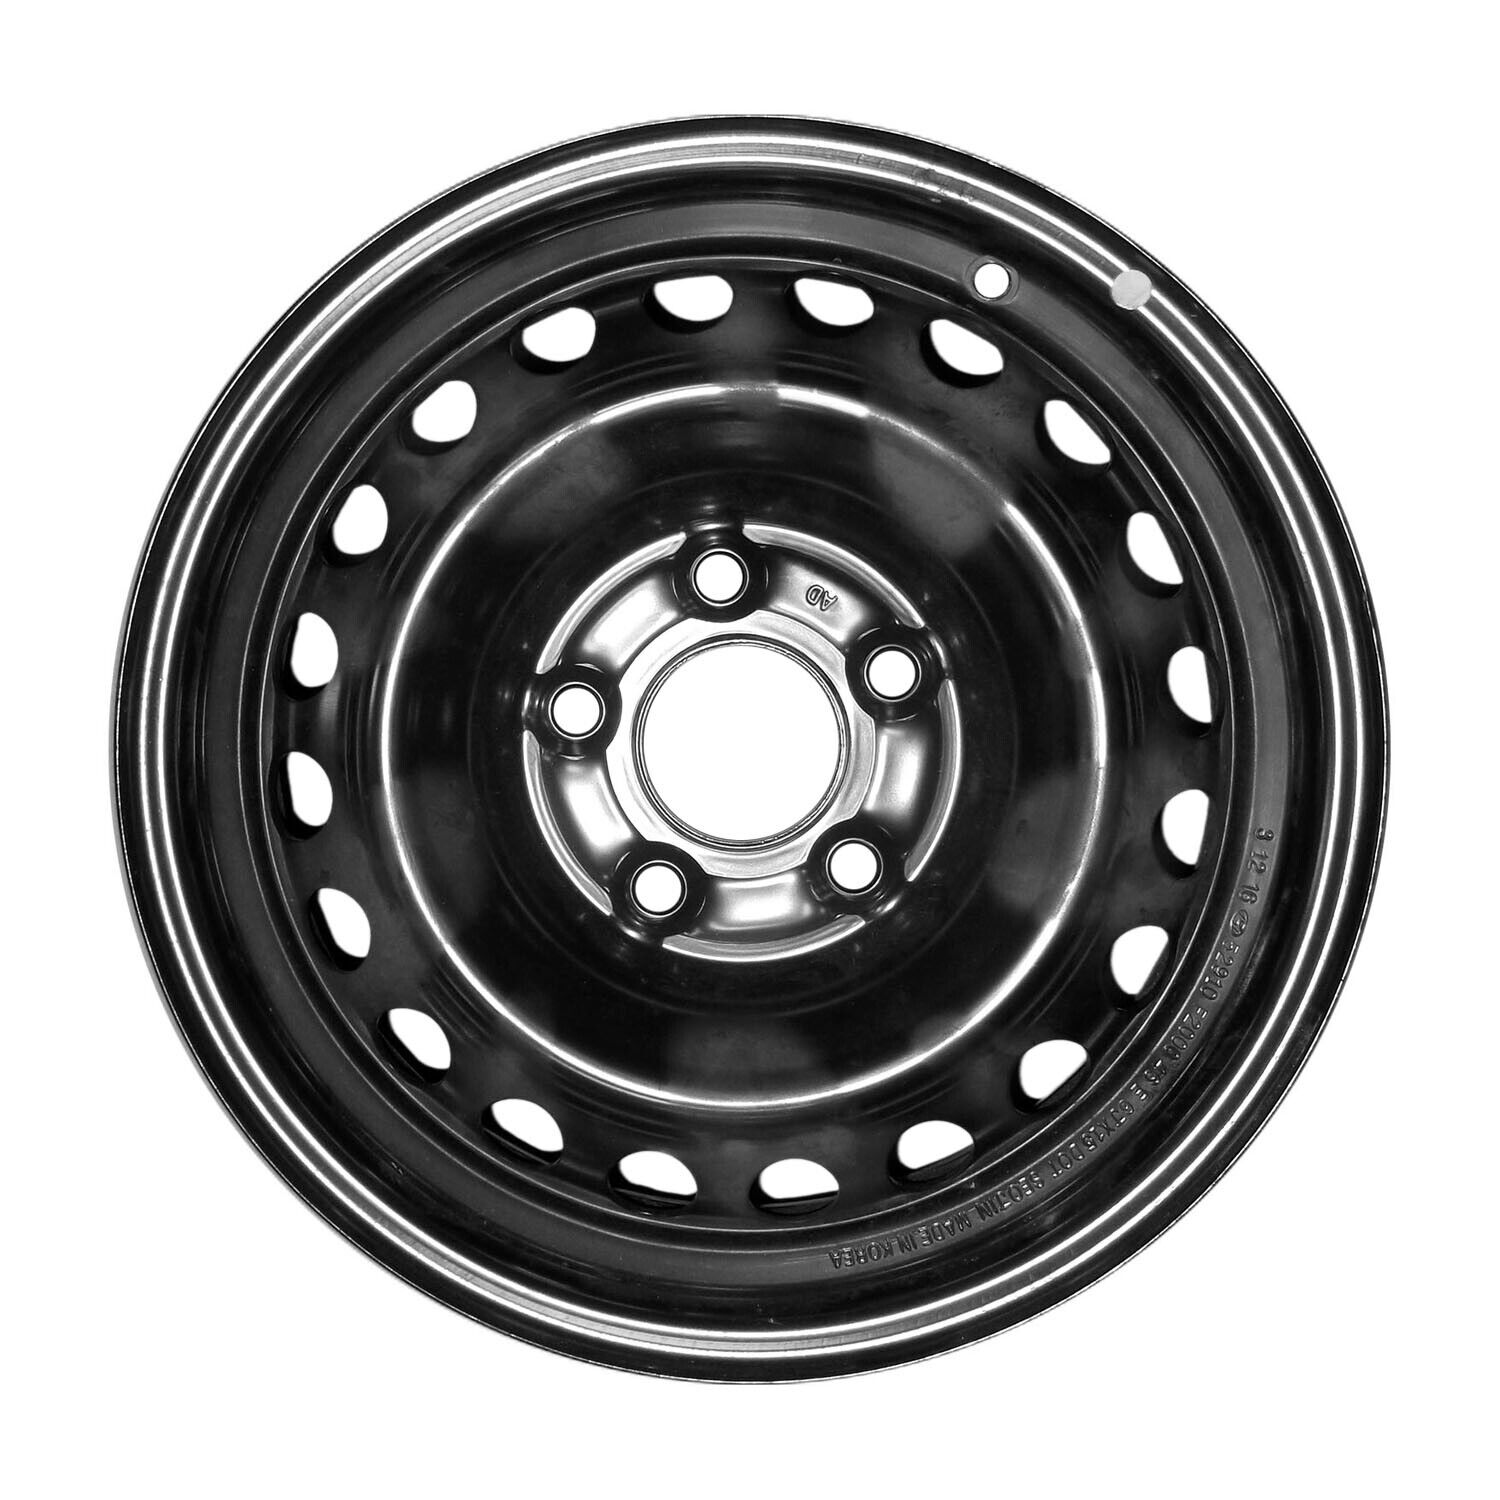 Reconditioned 15x6 Painted Black Wheel fits 560-70905